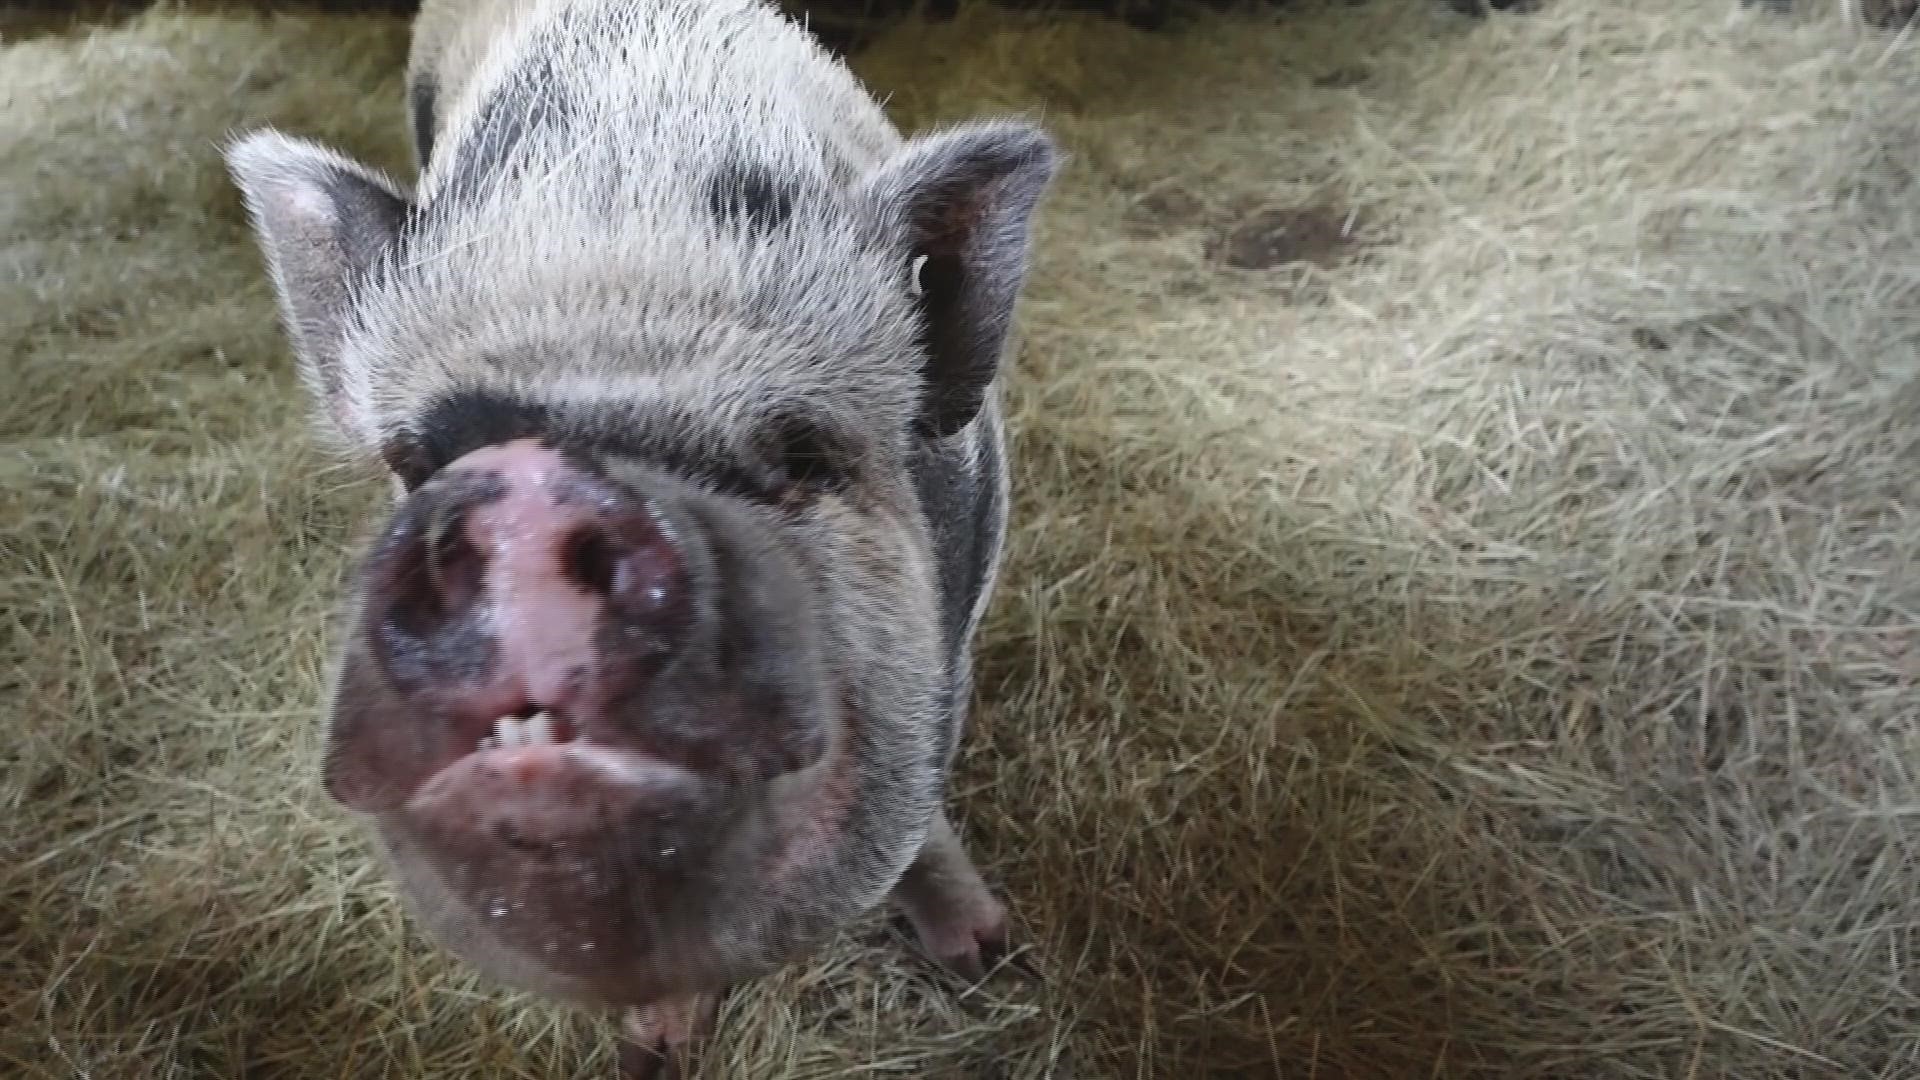 The organization was reaching out for the community's help to find three pot-bellied pigs a forever farm.